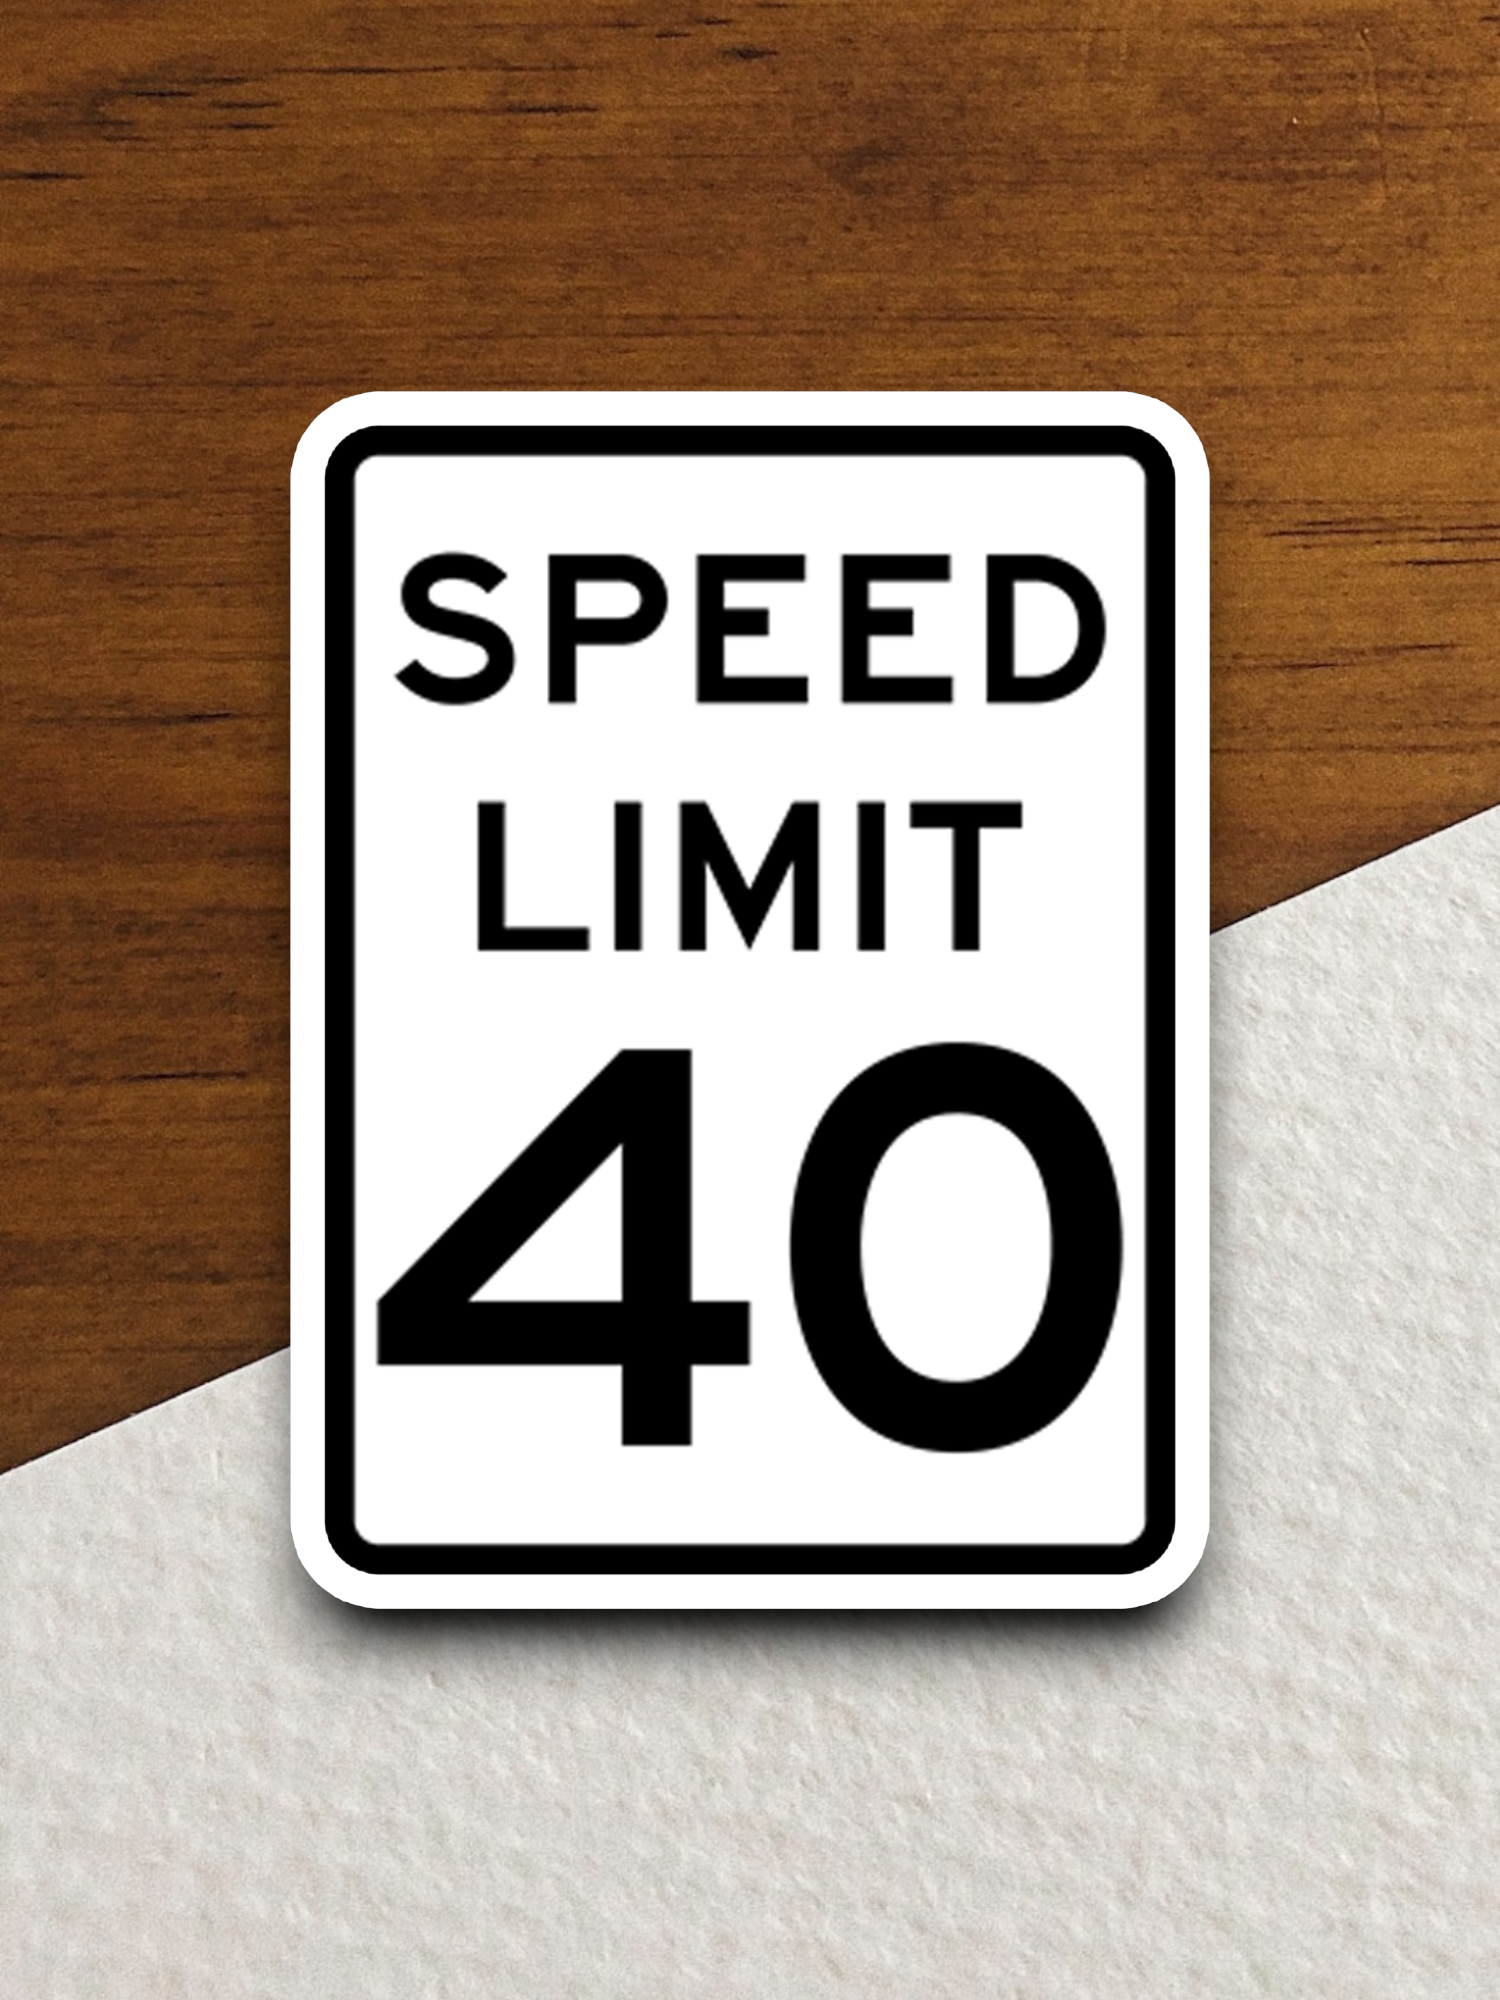 40 Miles Per Hour Speed Limit Road Sign Sticker